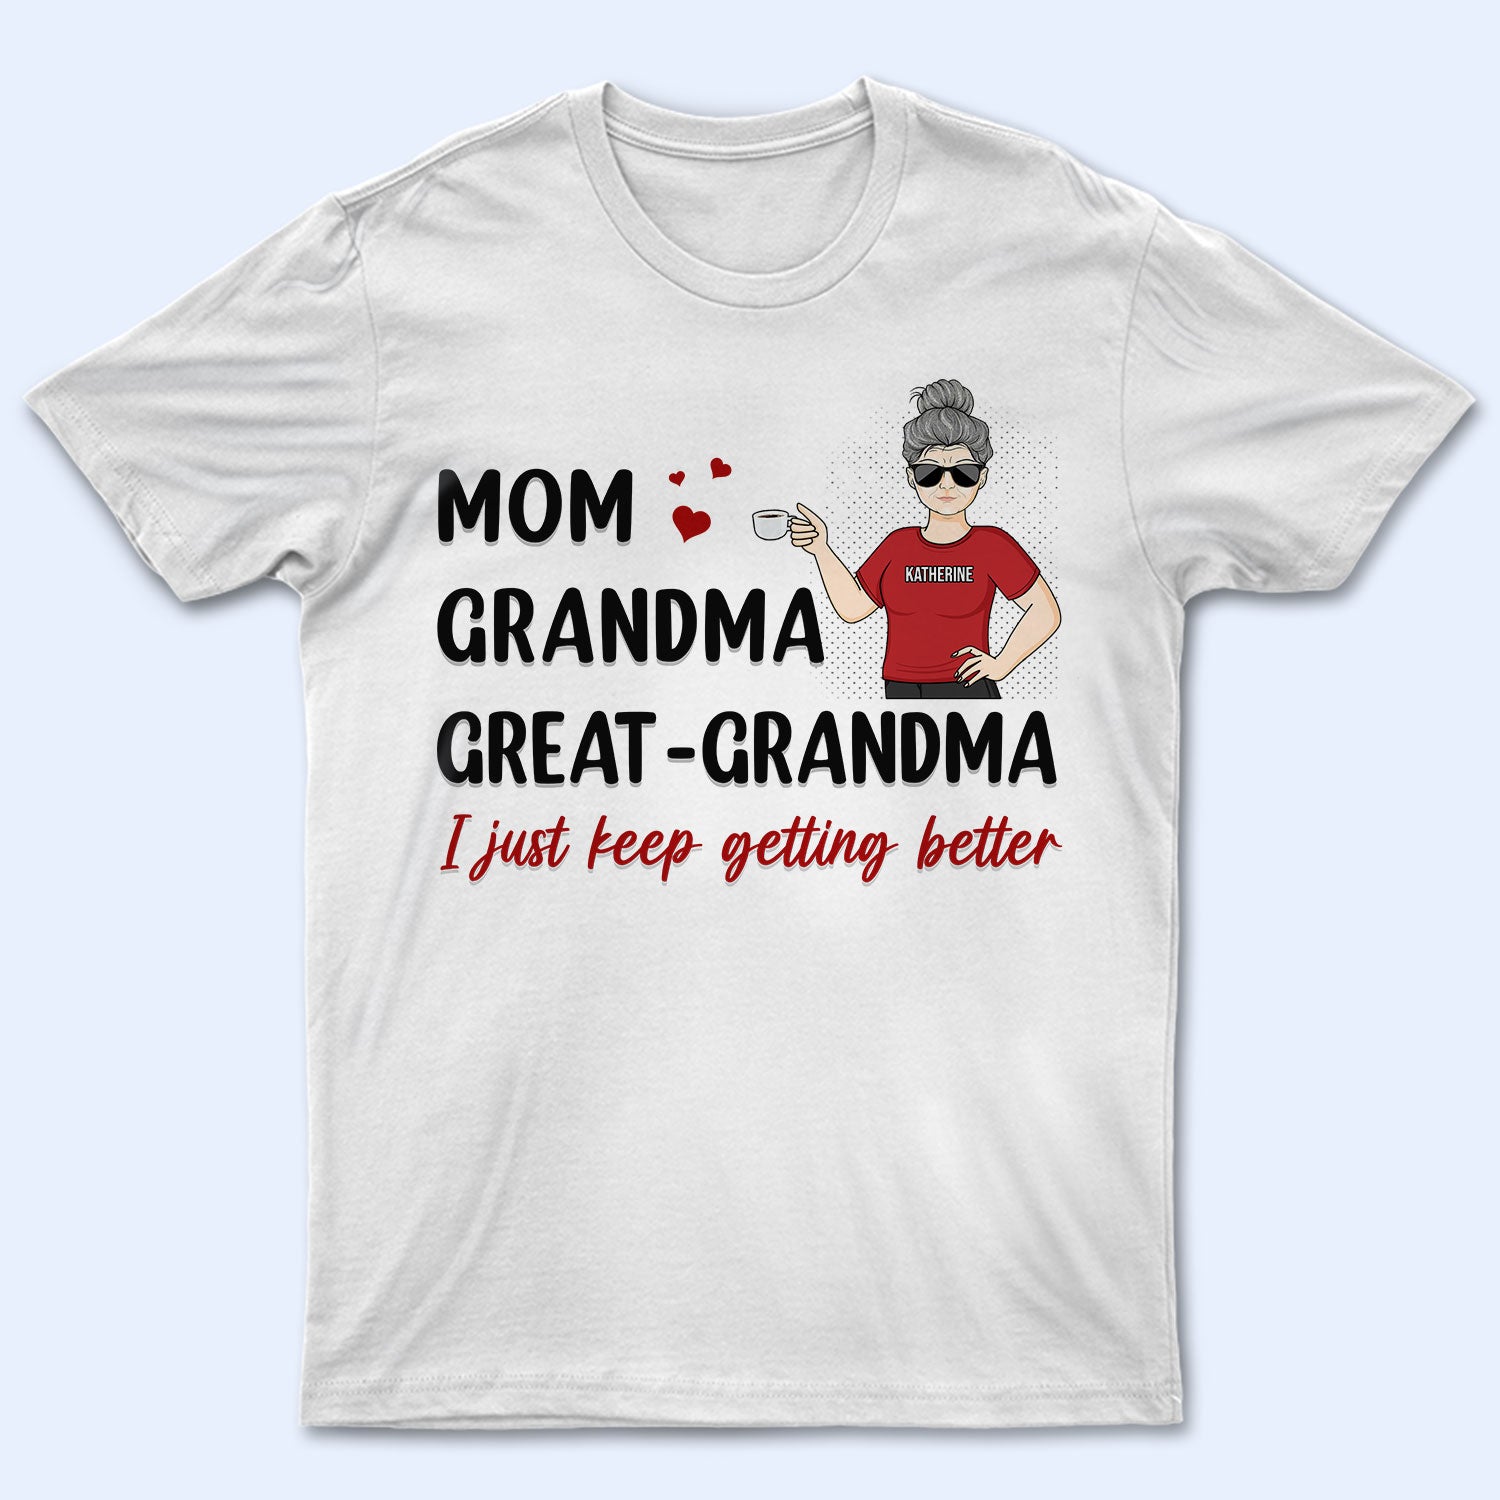 Mom I Just Keep Getting Better - Gift For Mother & Grandma - Personalized Custom T Shirt